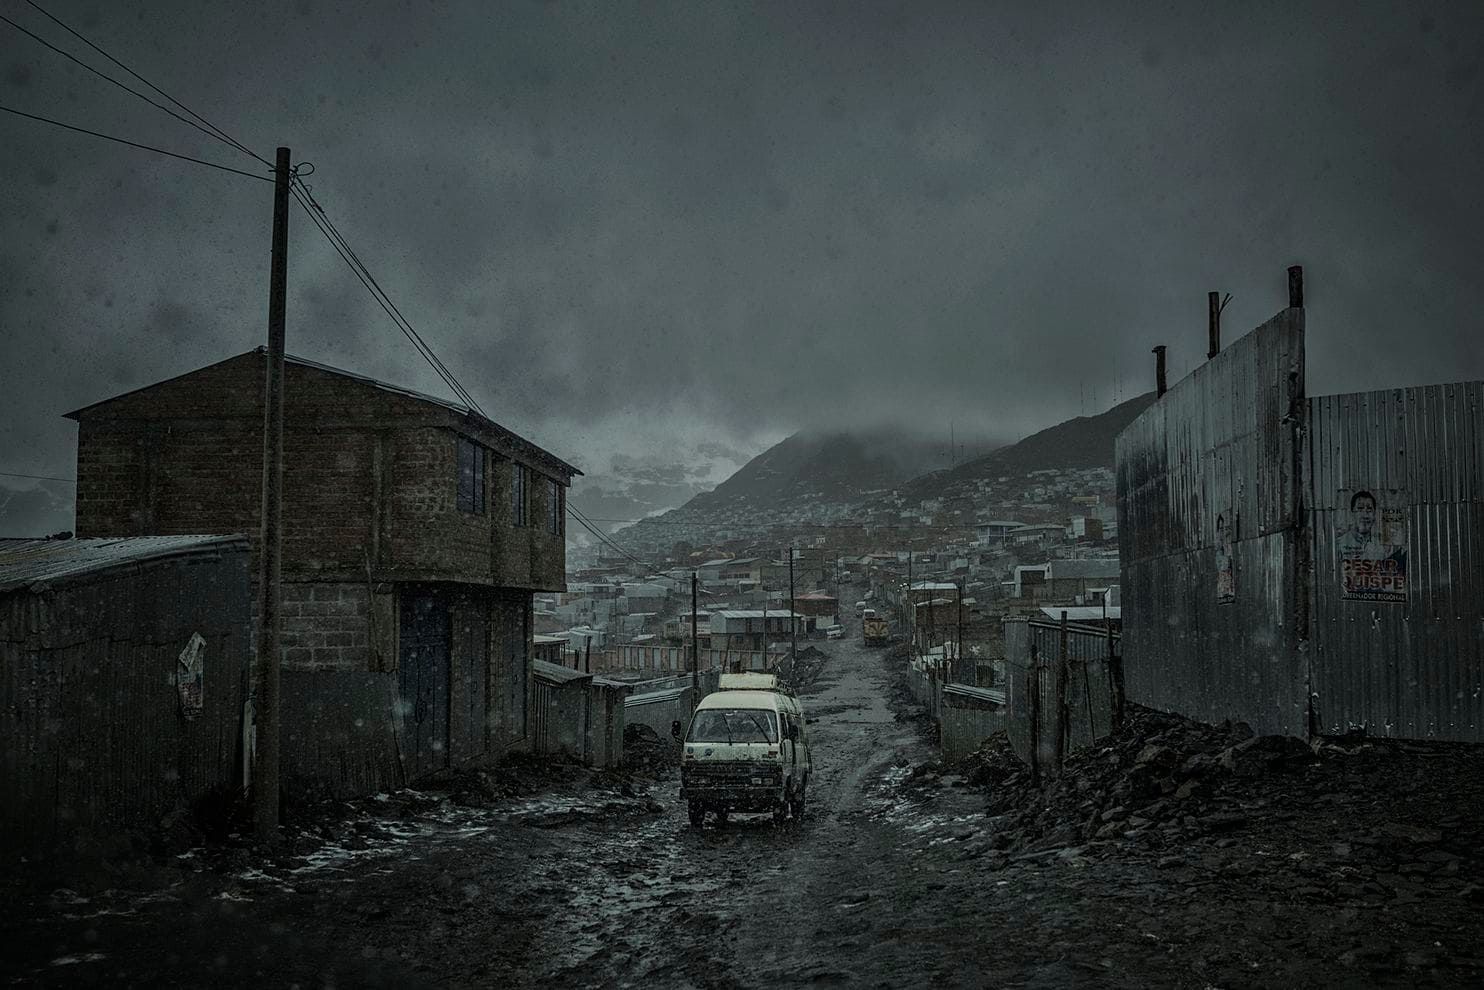 Wet snow immediately melts as it touches the ground, contributing to the muddy squalor at La Rinconada mine. Peru, 2019. Image by James Whitlow Delano.